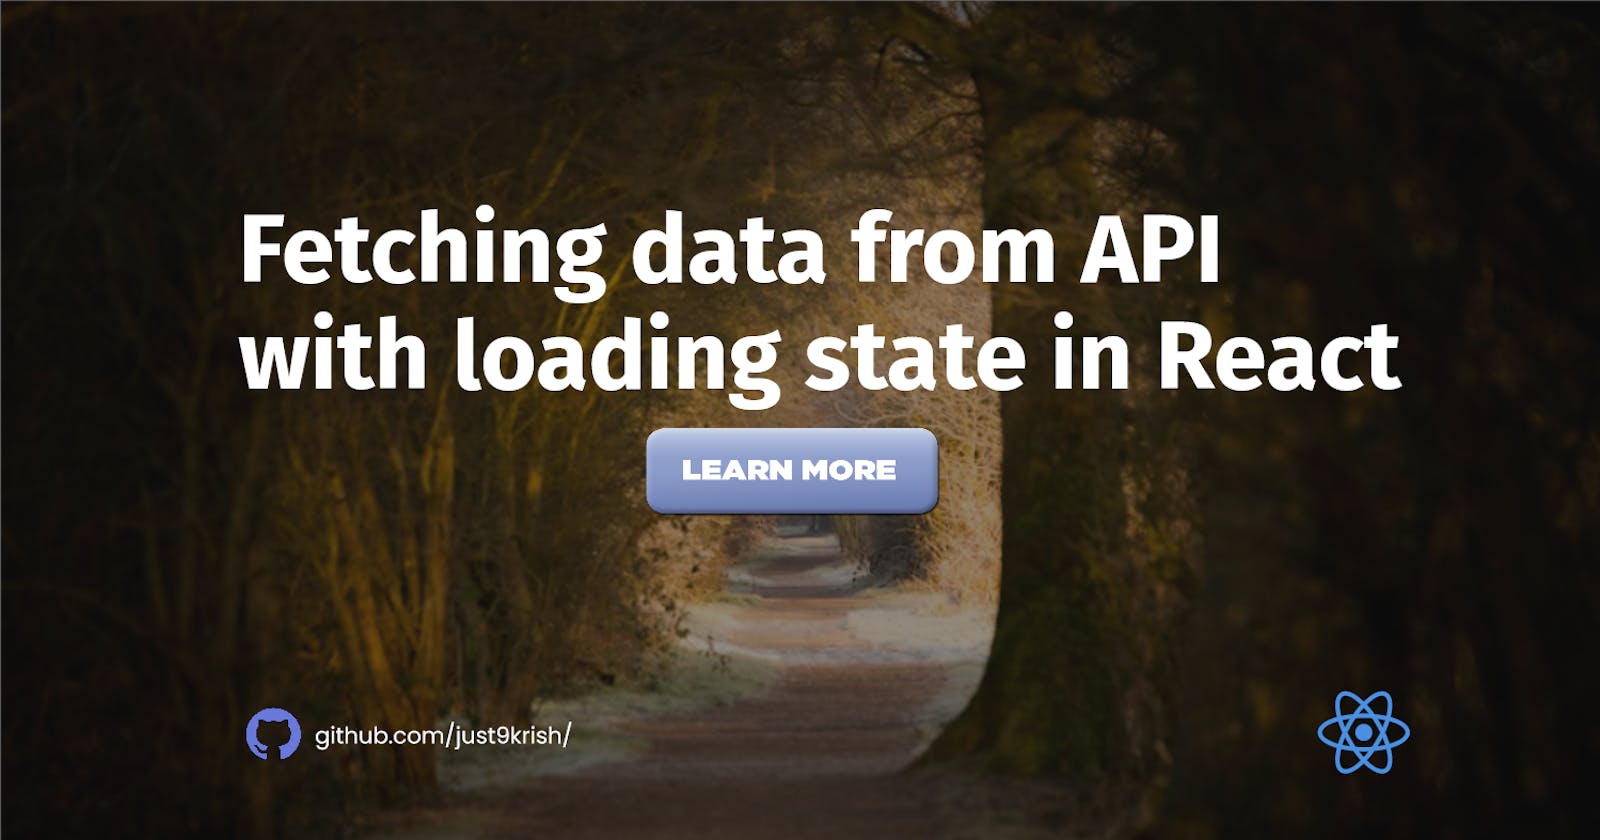 Fetching data from API with loading state in React